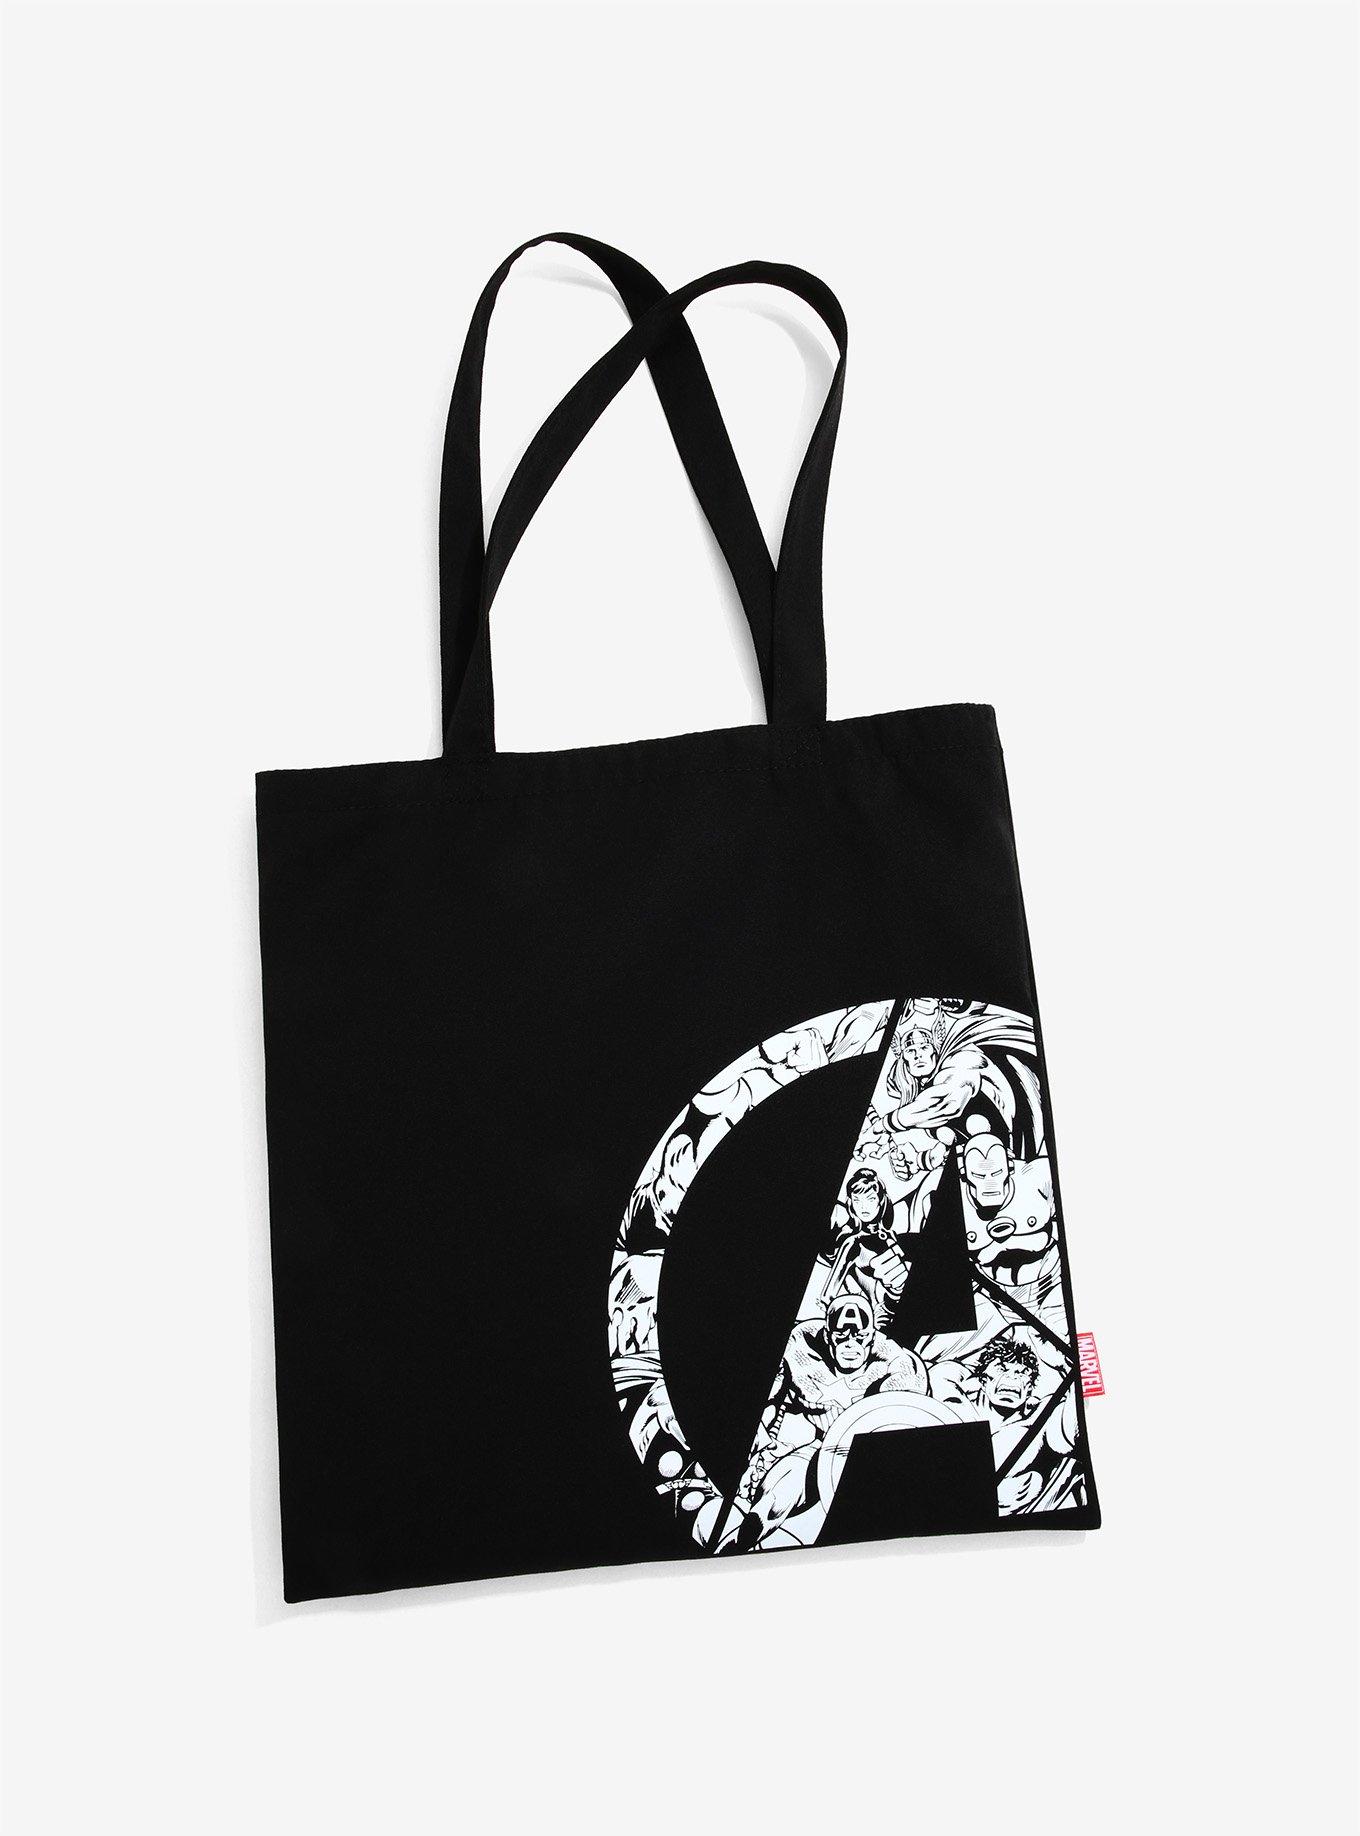 Loungefly Marvel Avengers Trainee Tote - BoxLunch Exclusive, , alternate